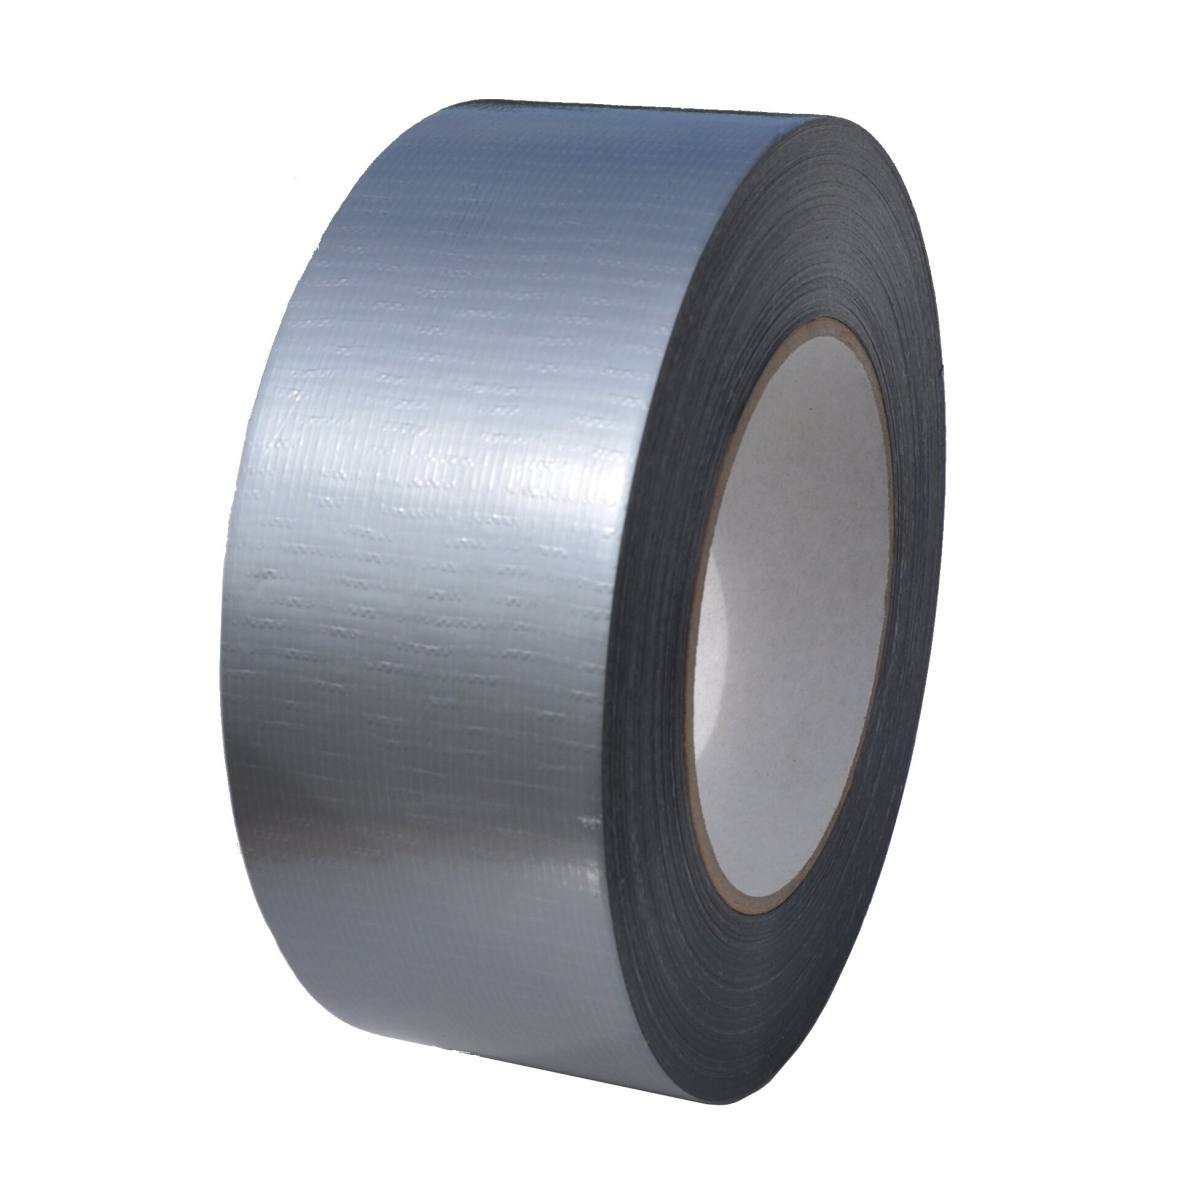 S-K-S 980 fabric tape 50mmx50m silver